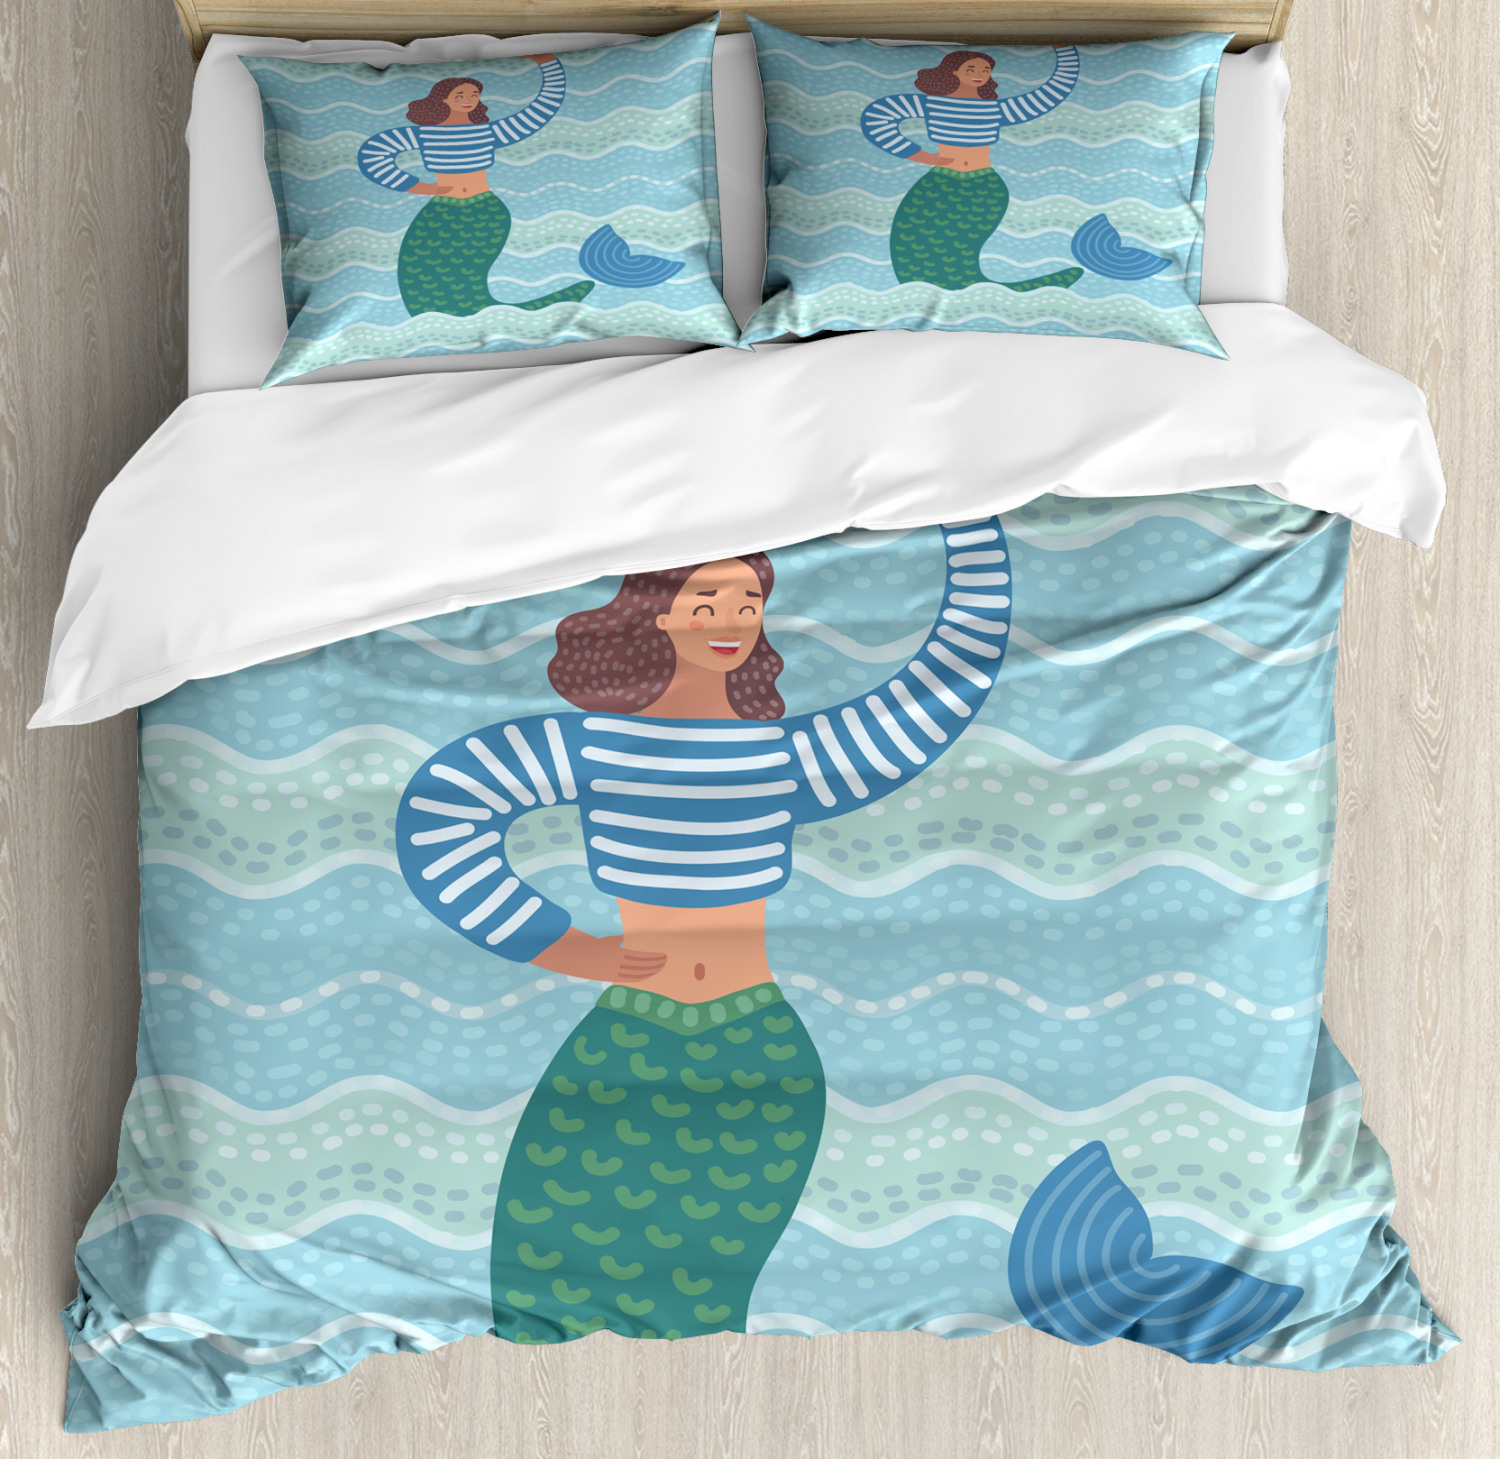 Mermaid Duvet Cover Set King Size, Fish Tailed Woman Waving Happily on Abstract Doodle Waves Pastel Tones Illustration, Decorative 3 Piece Bedding Set with 2 Pillow Shams, Multicolor, by Ambesonne - image 1 of 3